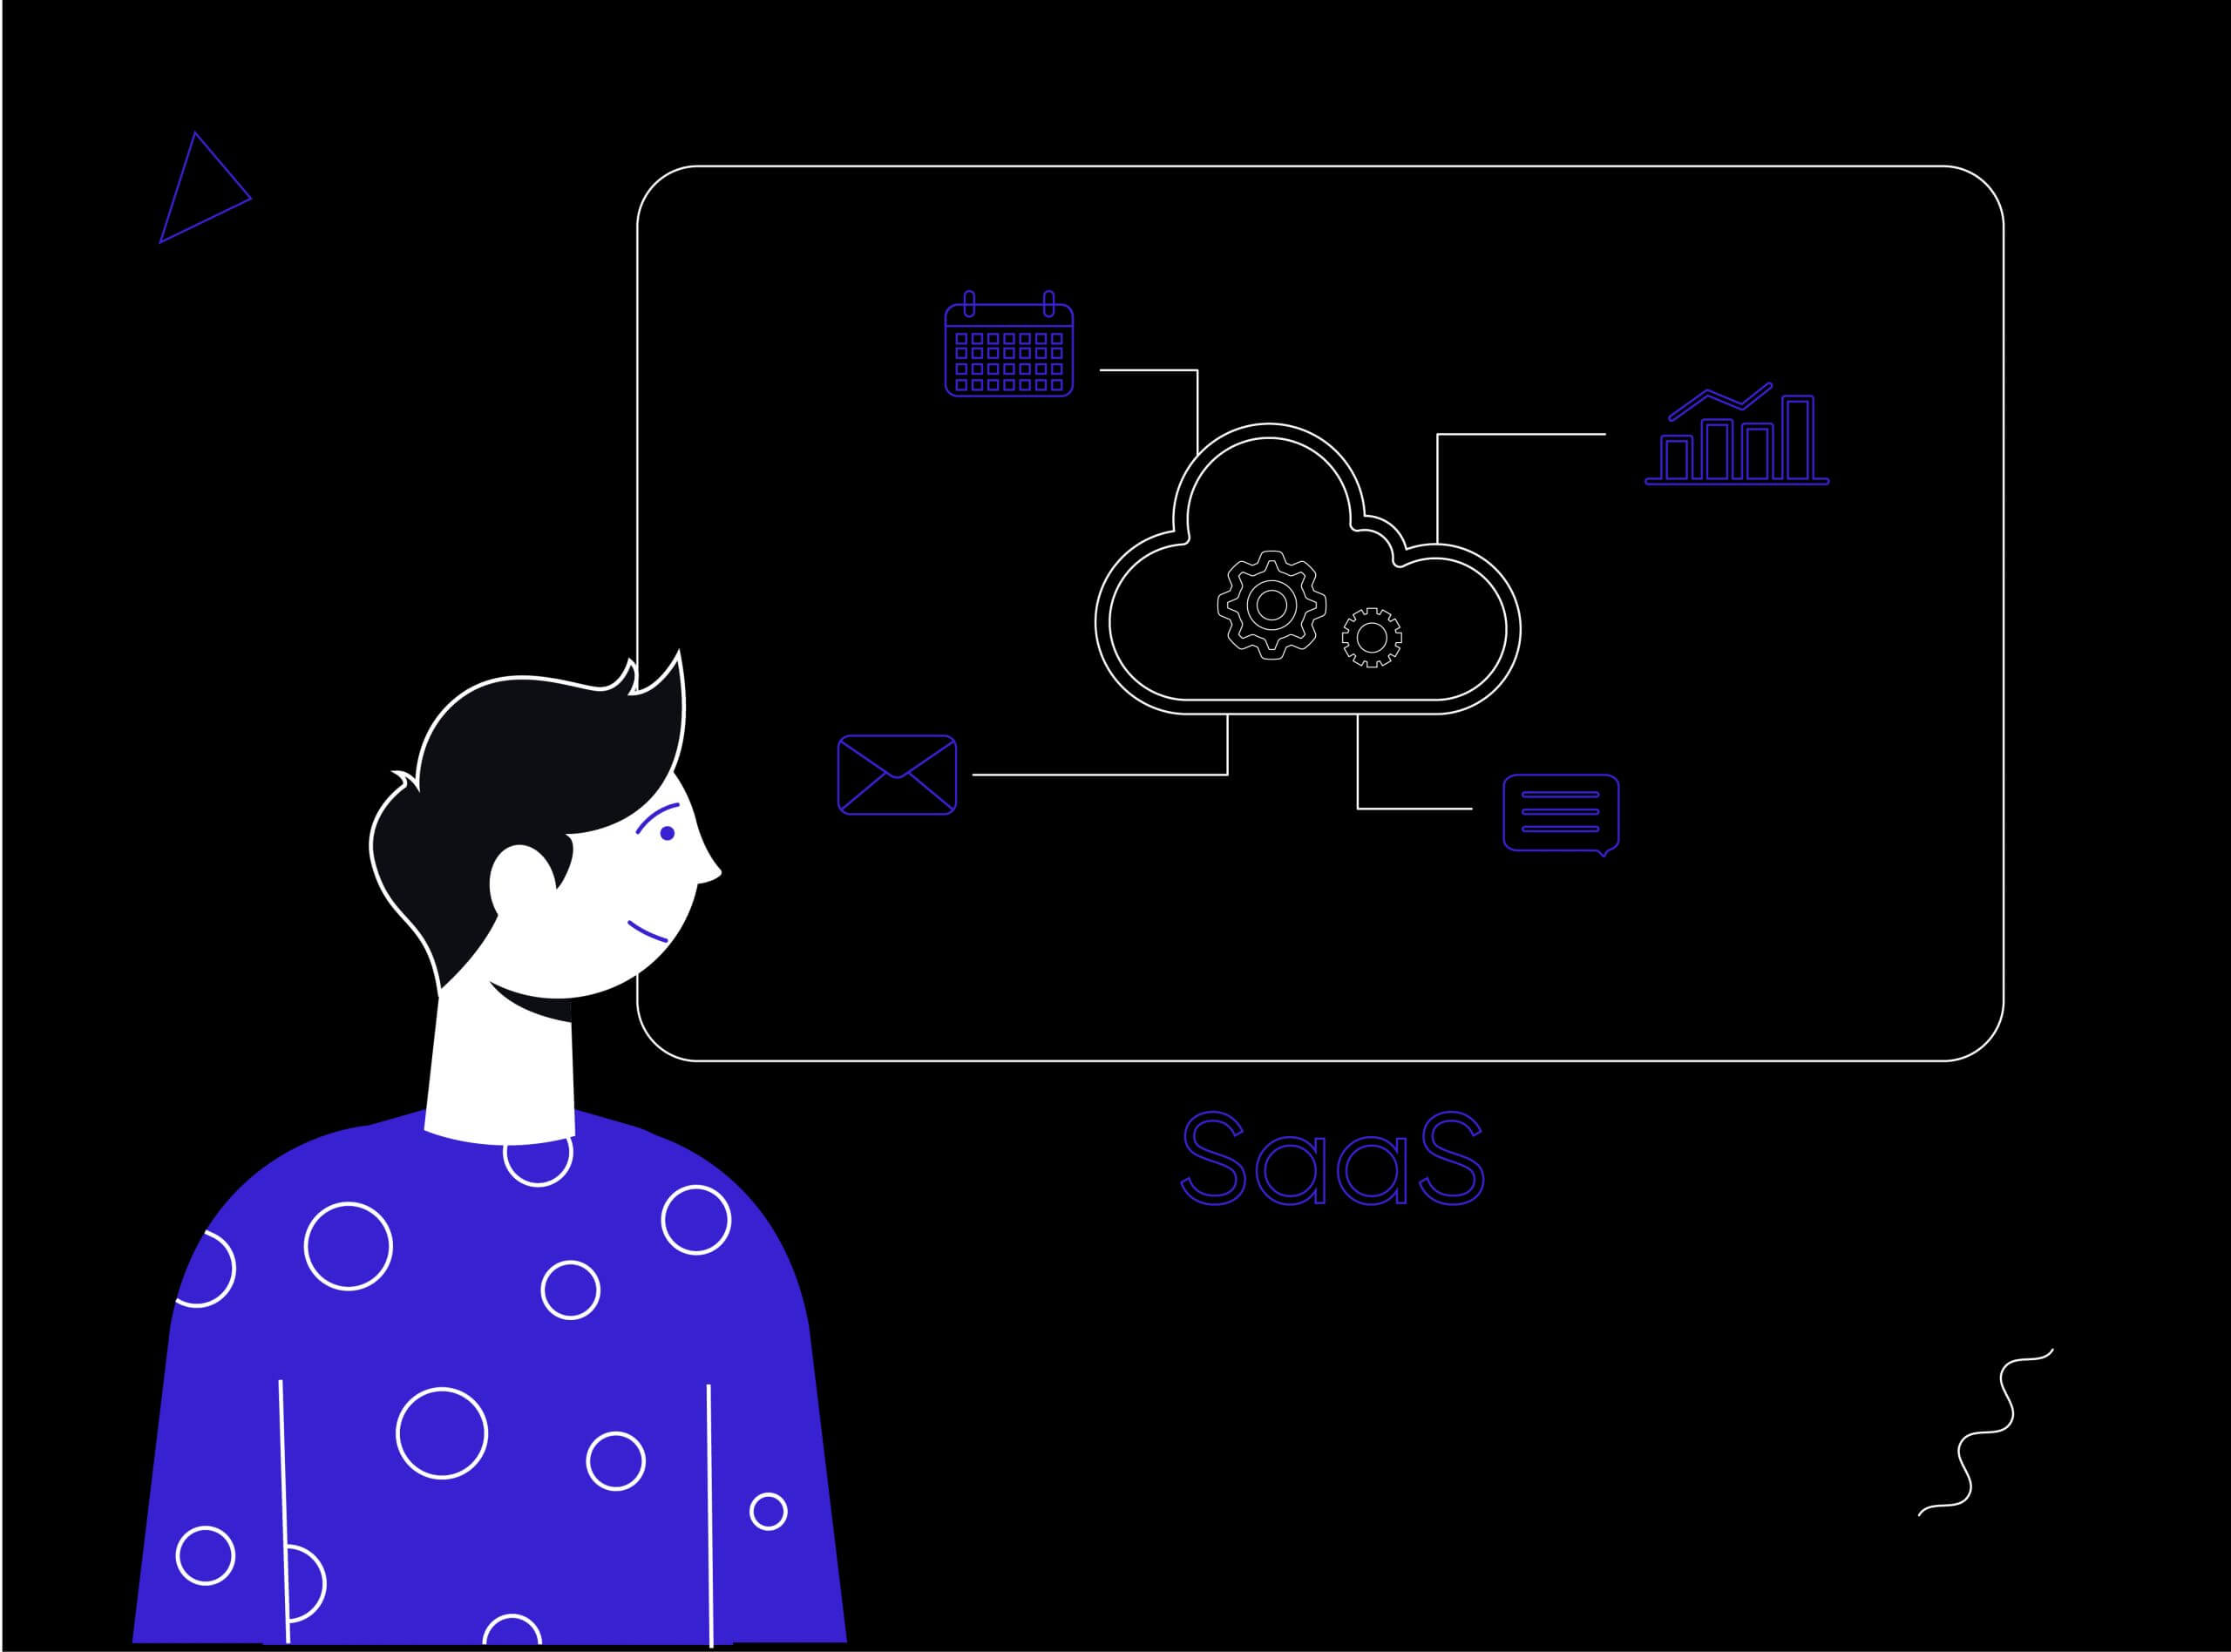 The importance of UX in building SaaS products